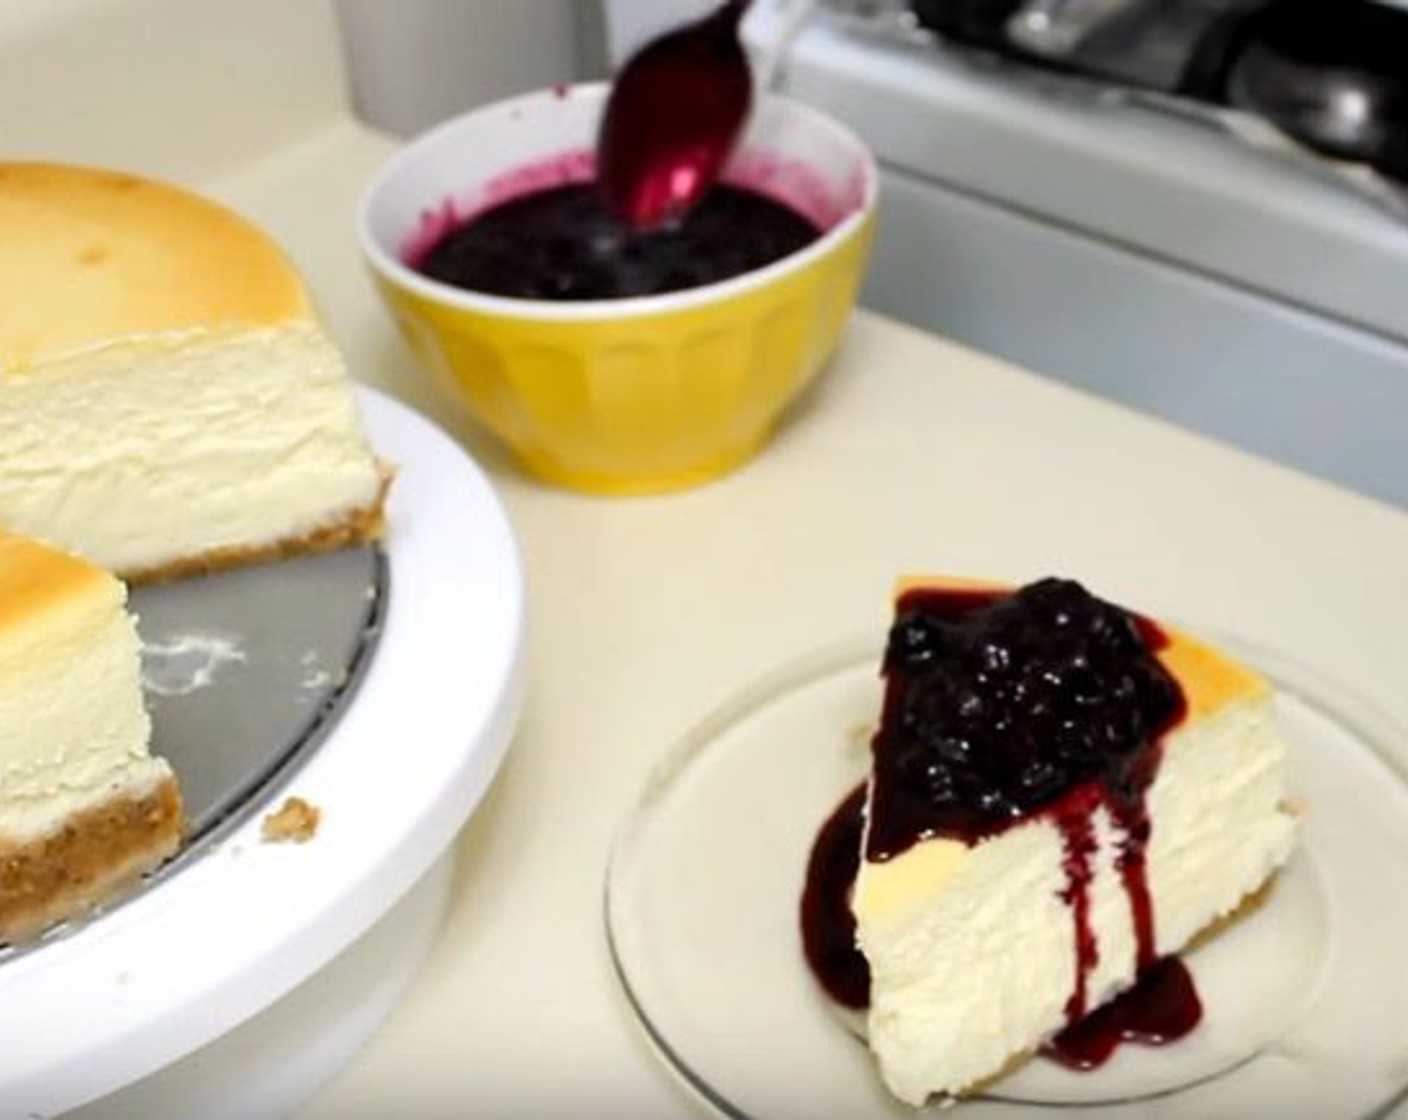 step 12 When ready to serve, top the cheesecake with the blueberry compote.